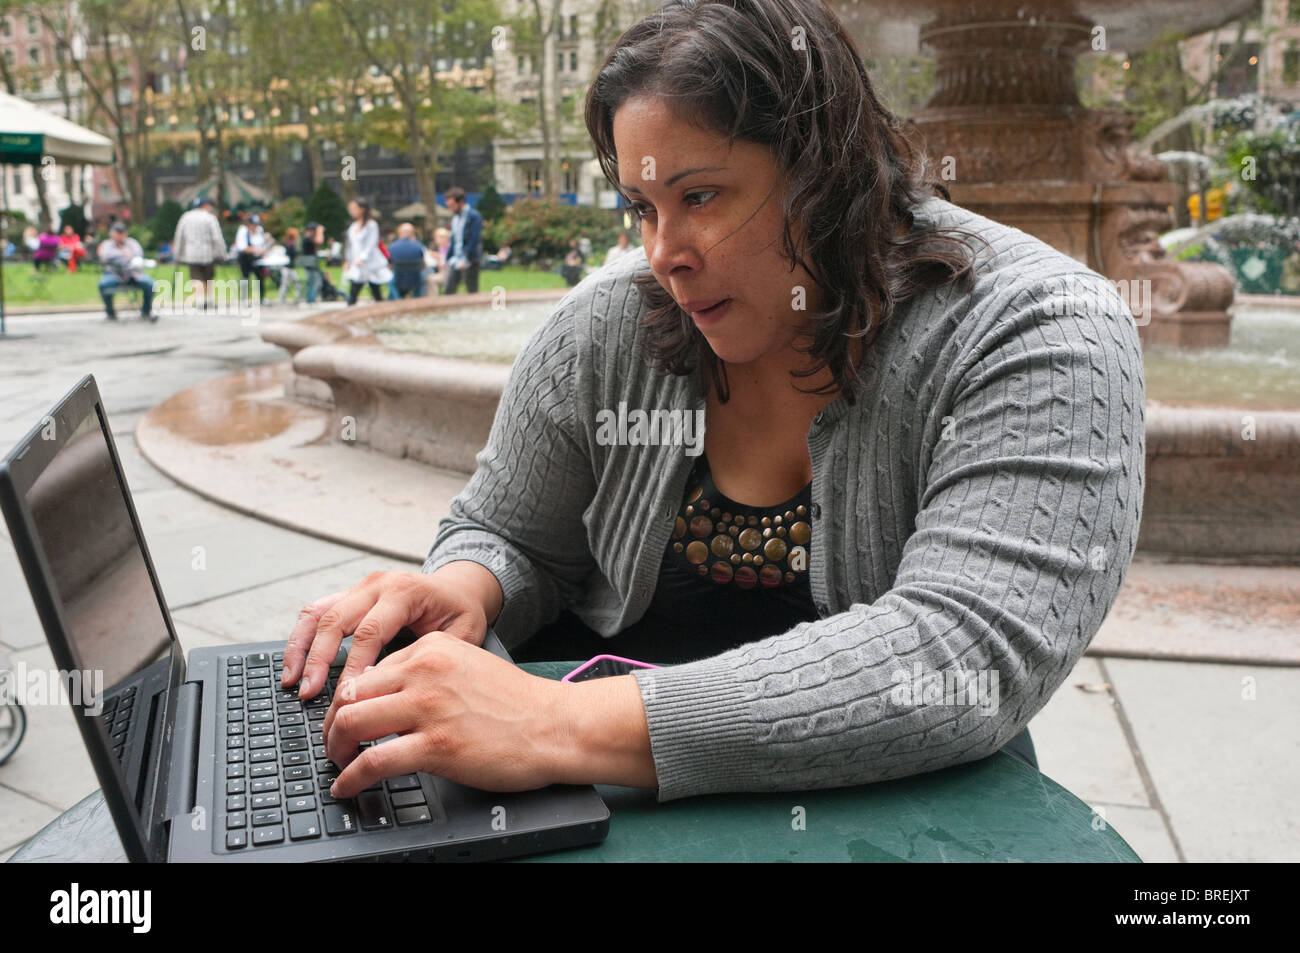 Olga Correa uses a MacBook laptop to access free wireless internet connection in Midtown's Bryant Park Stock Photo